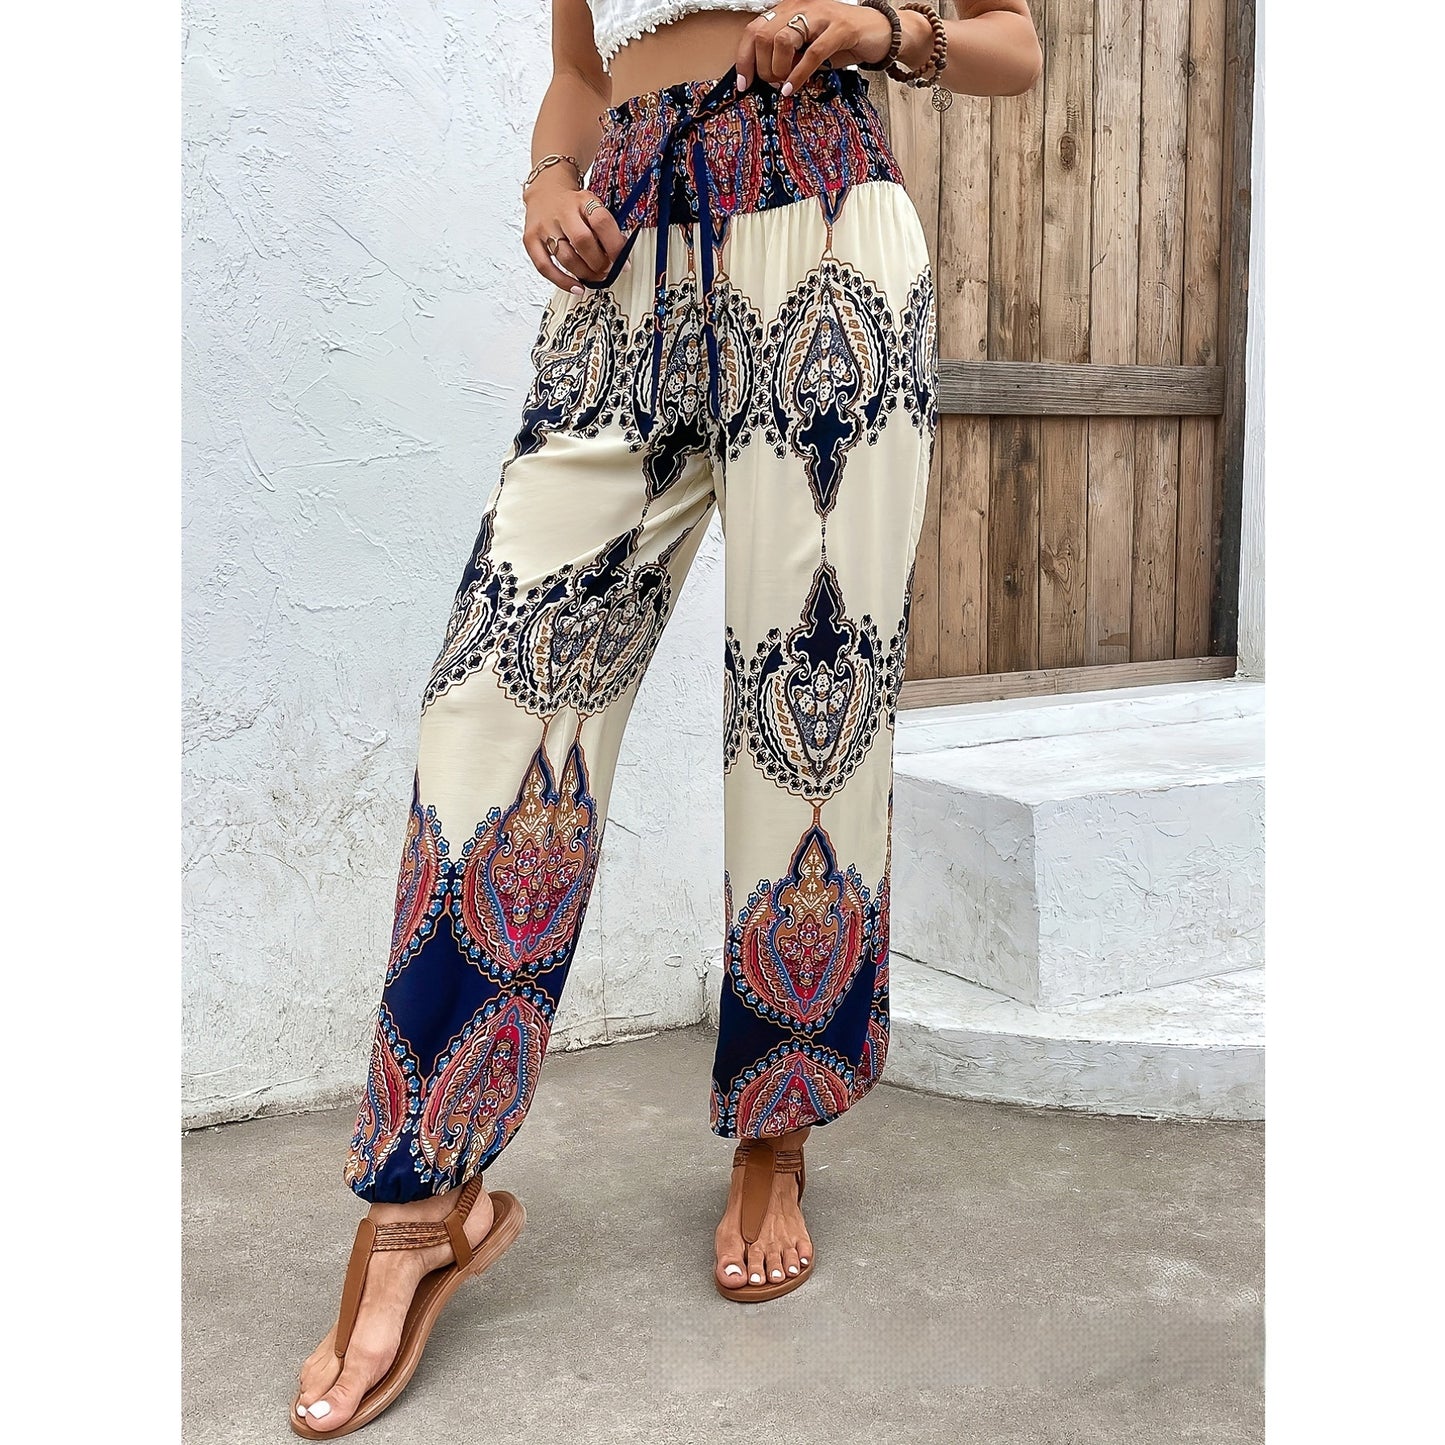 Ladies' National Style Fashion Casual Printed Pants